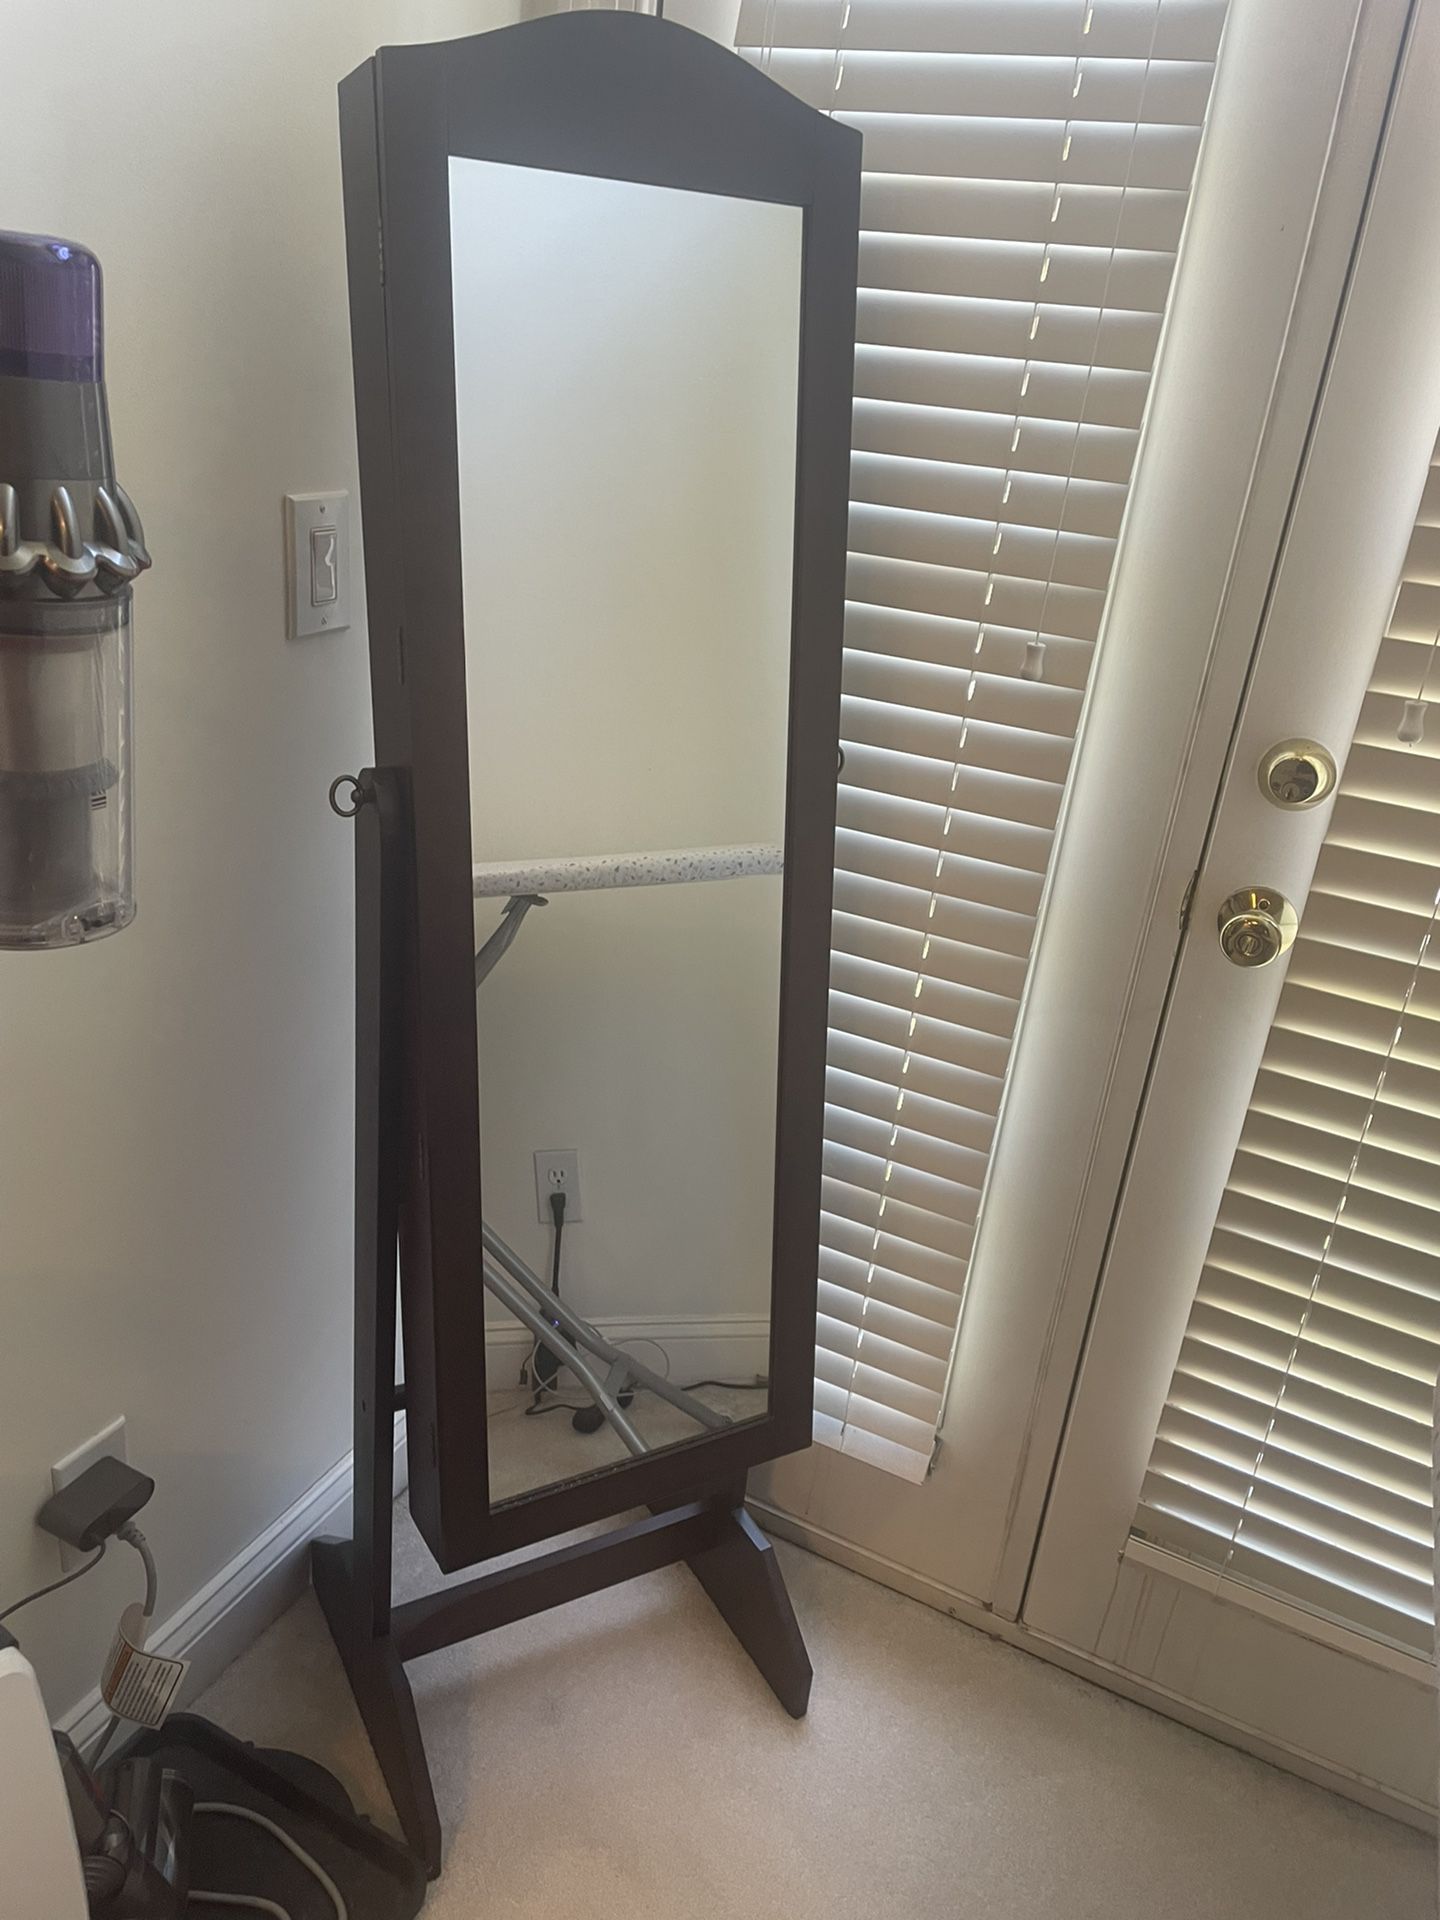 Standing mirror Full Length with hidden jewellery cabinet with lock Full length  New Never used 